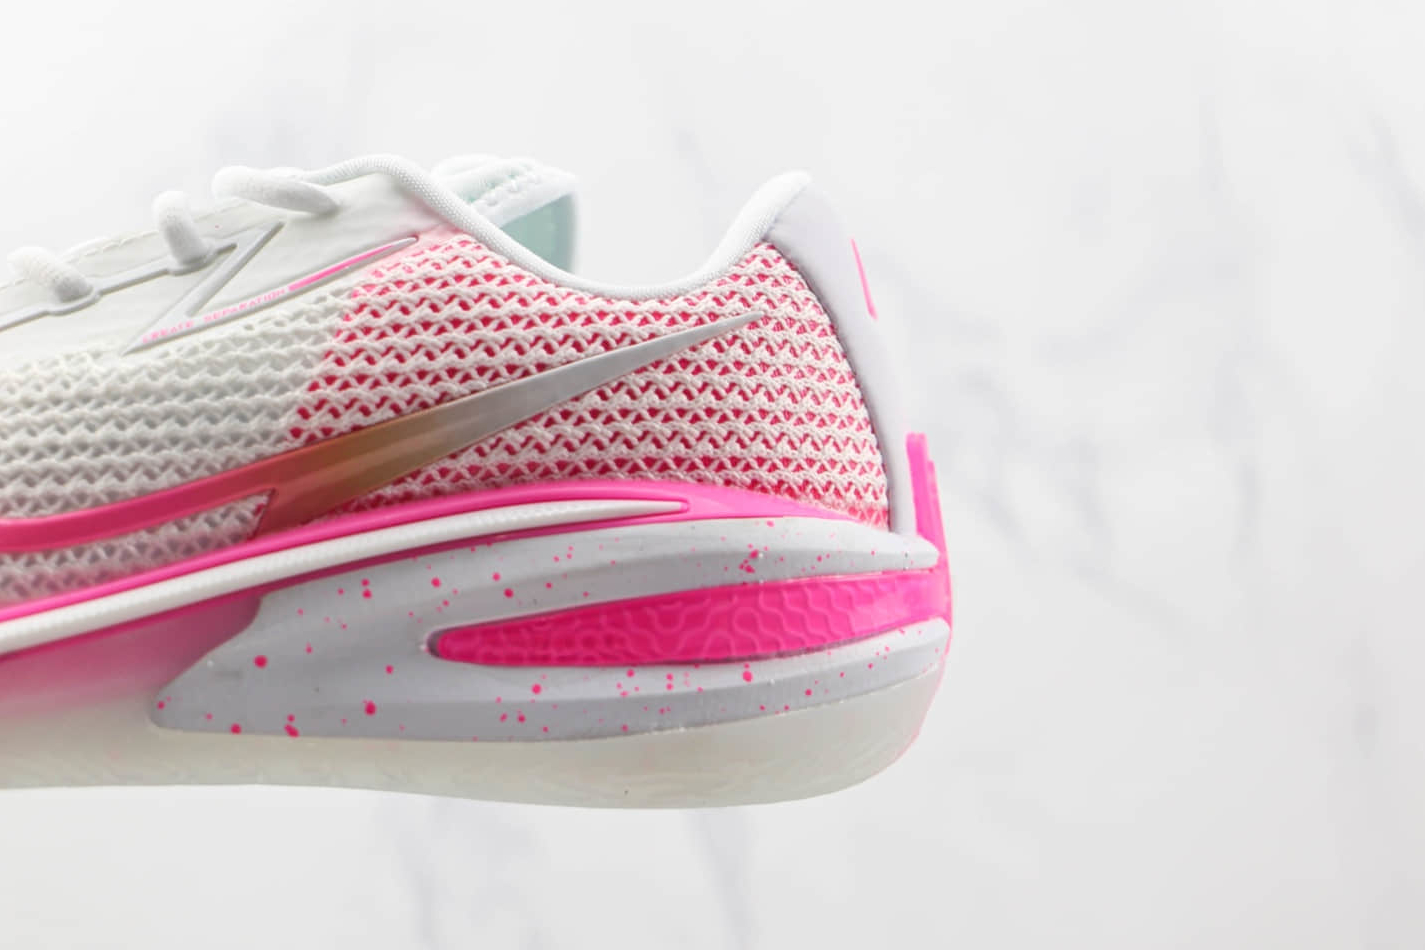 Nike Air Zoom GT Cut 'Pure Platinum Pink Blast' CZ0175-008 - Superior performance and style in this vibrant sneaker.